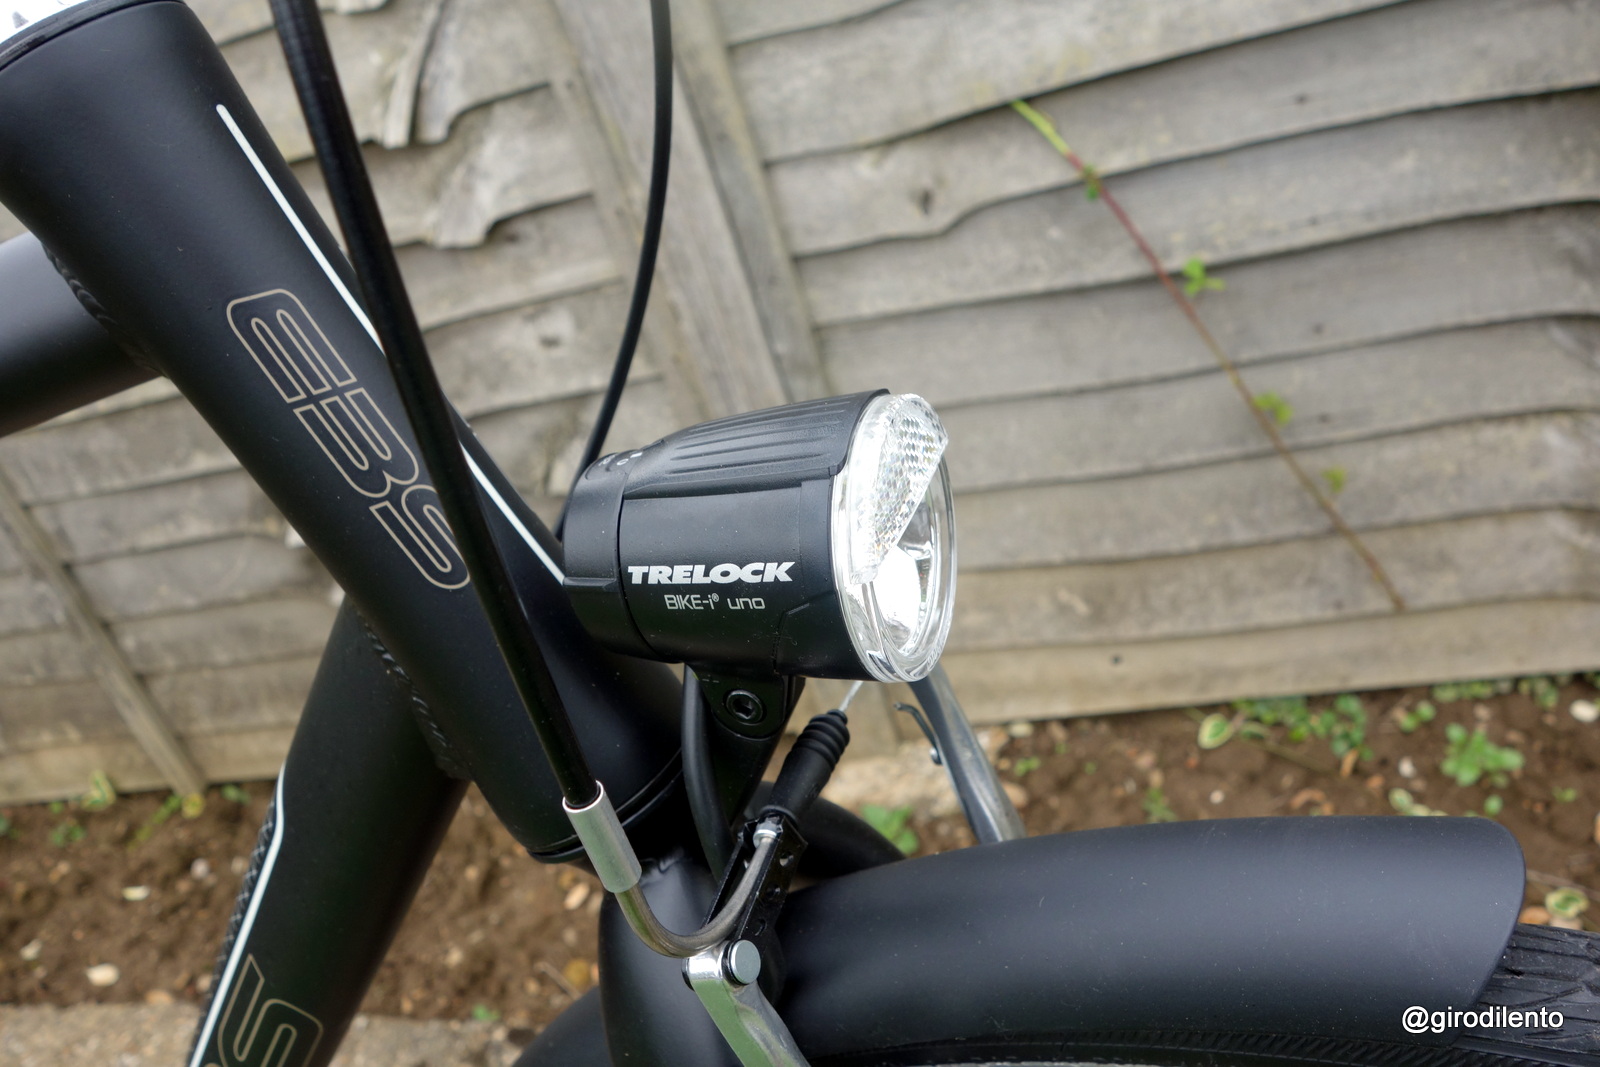 Trelock Dynamo front light - no more worrying about if your batteries are charged